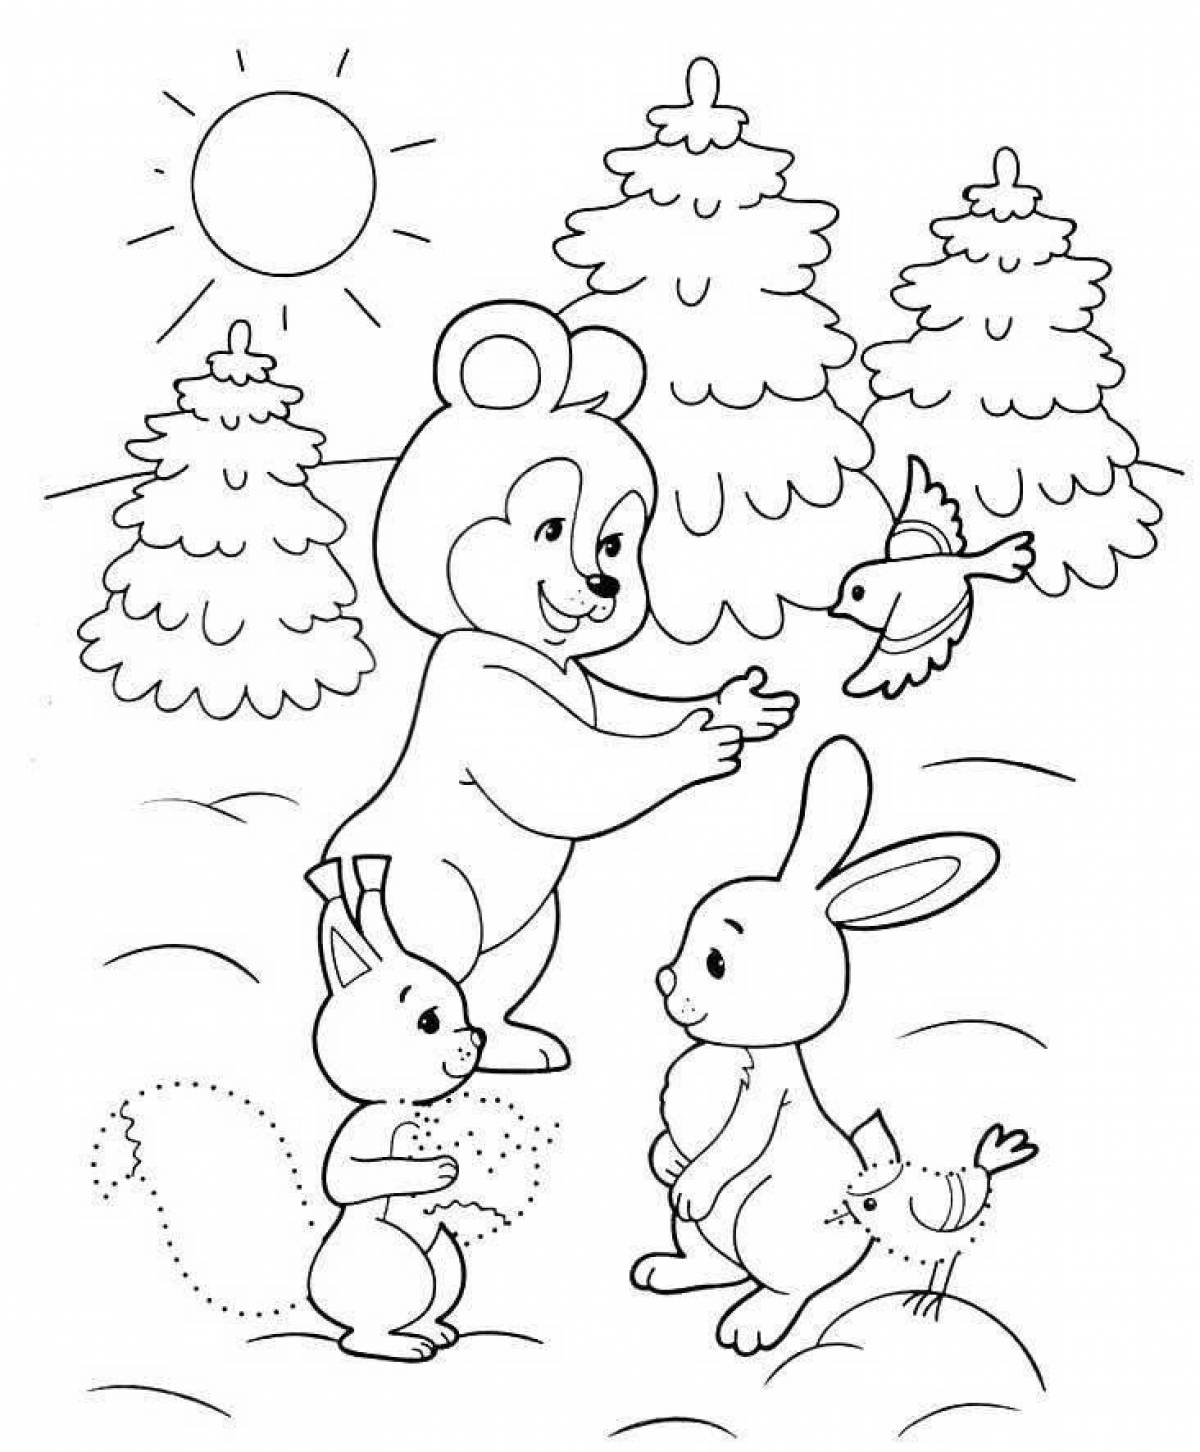 Violent coloring winter for children 6-7 years old